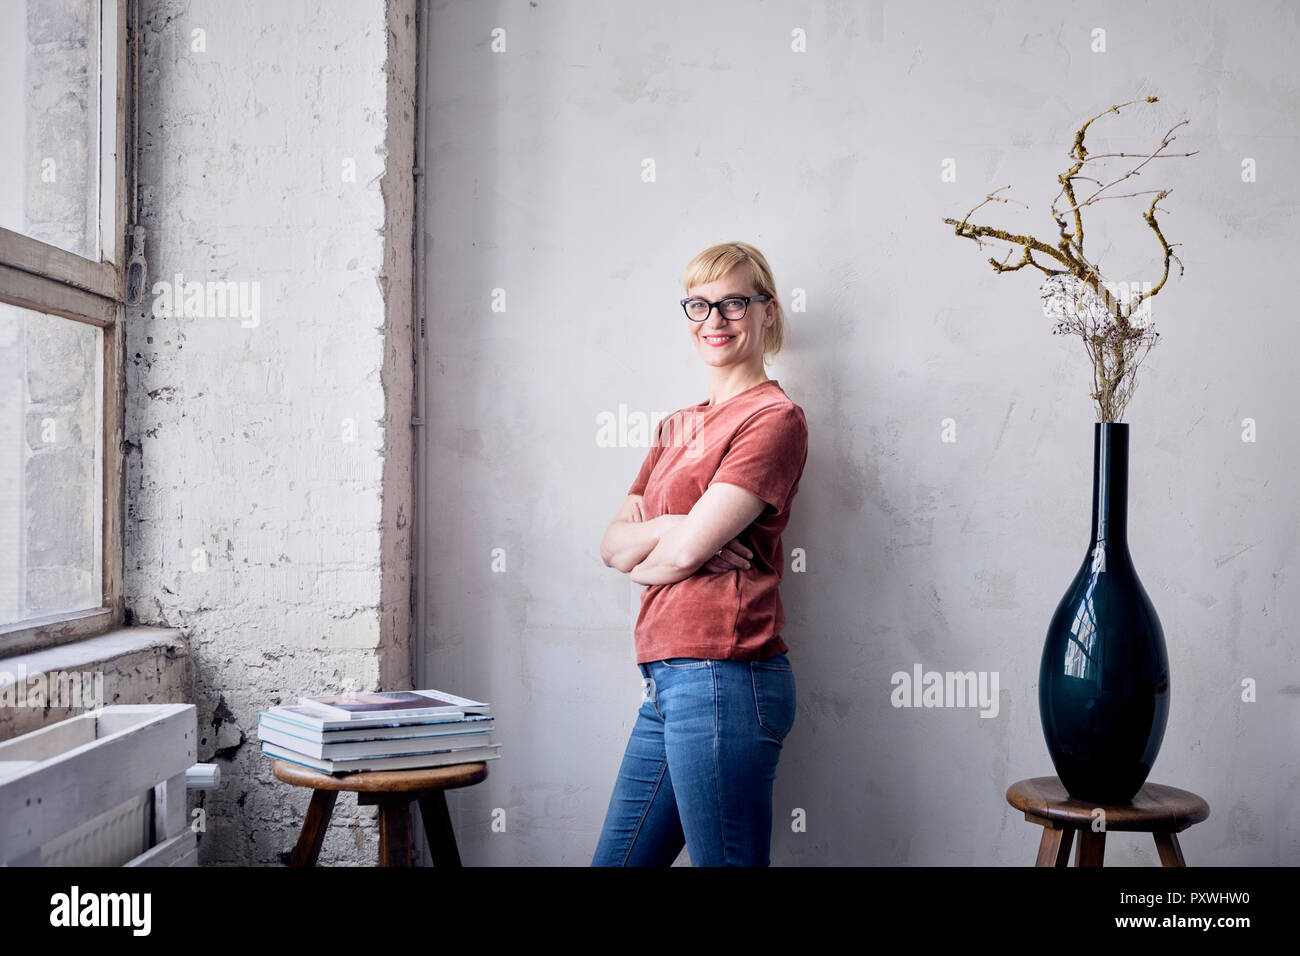 Portrait of smiling woman leaning against wall in loft Stock Photo